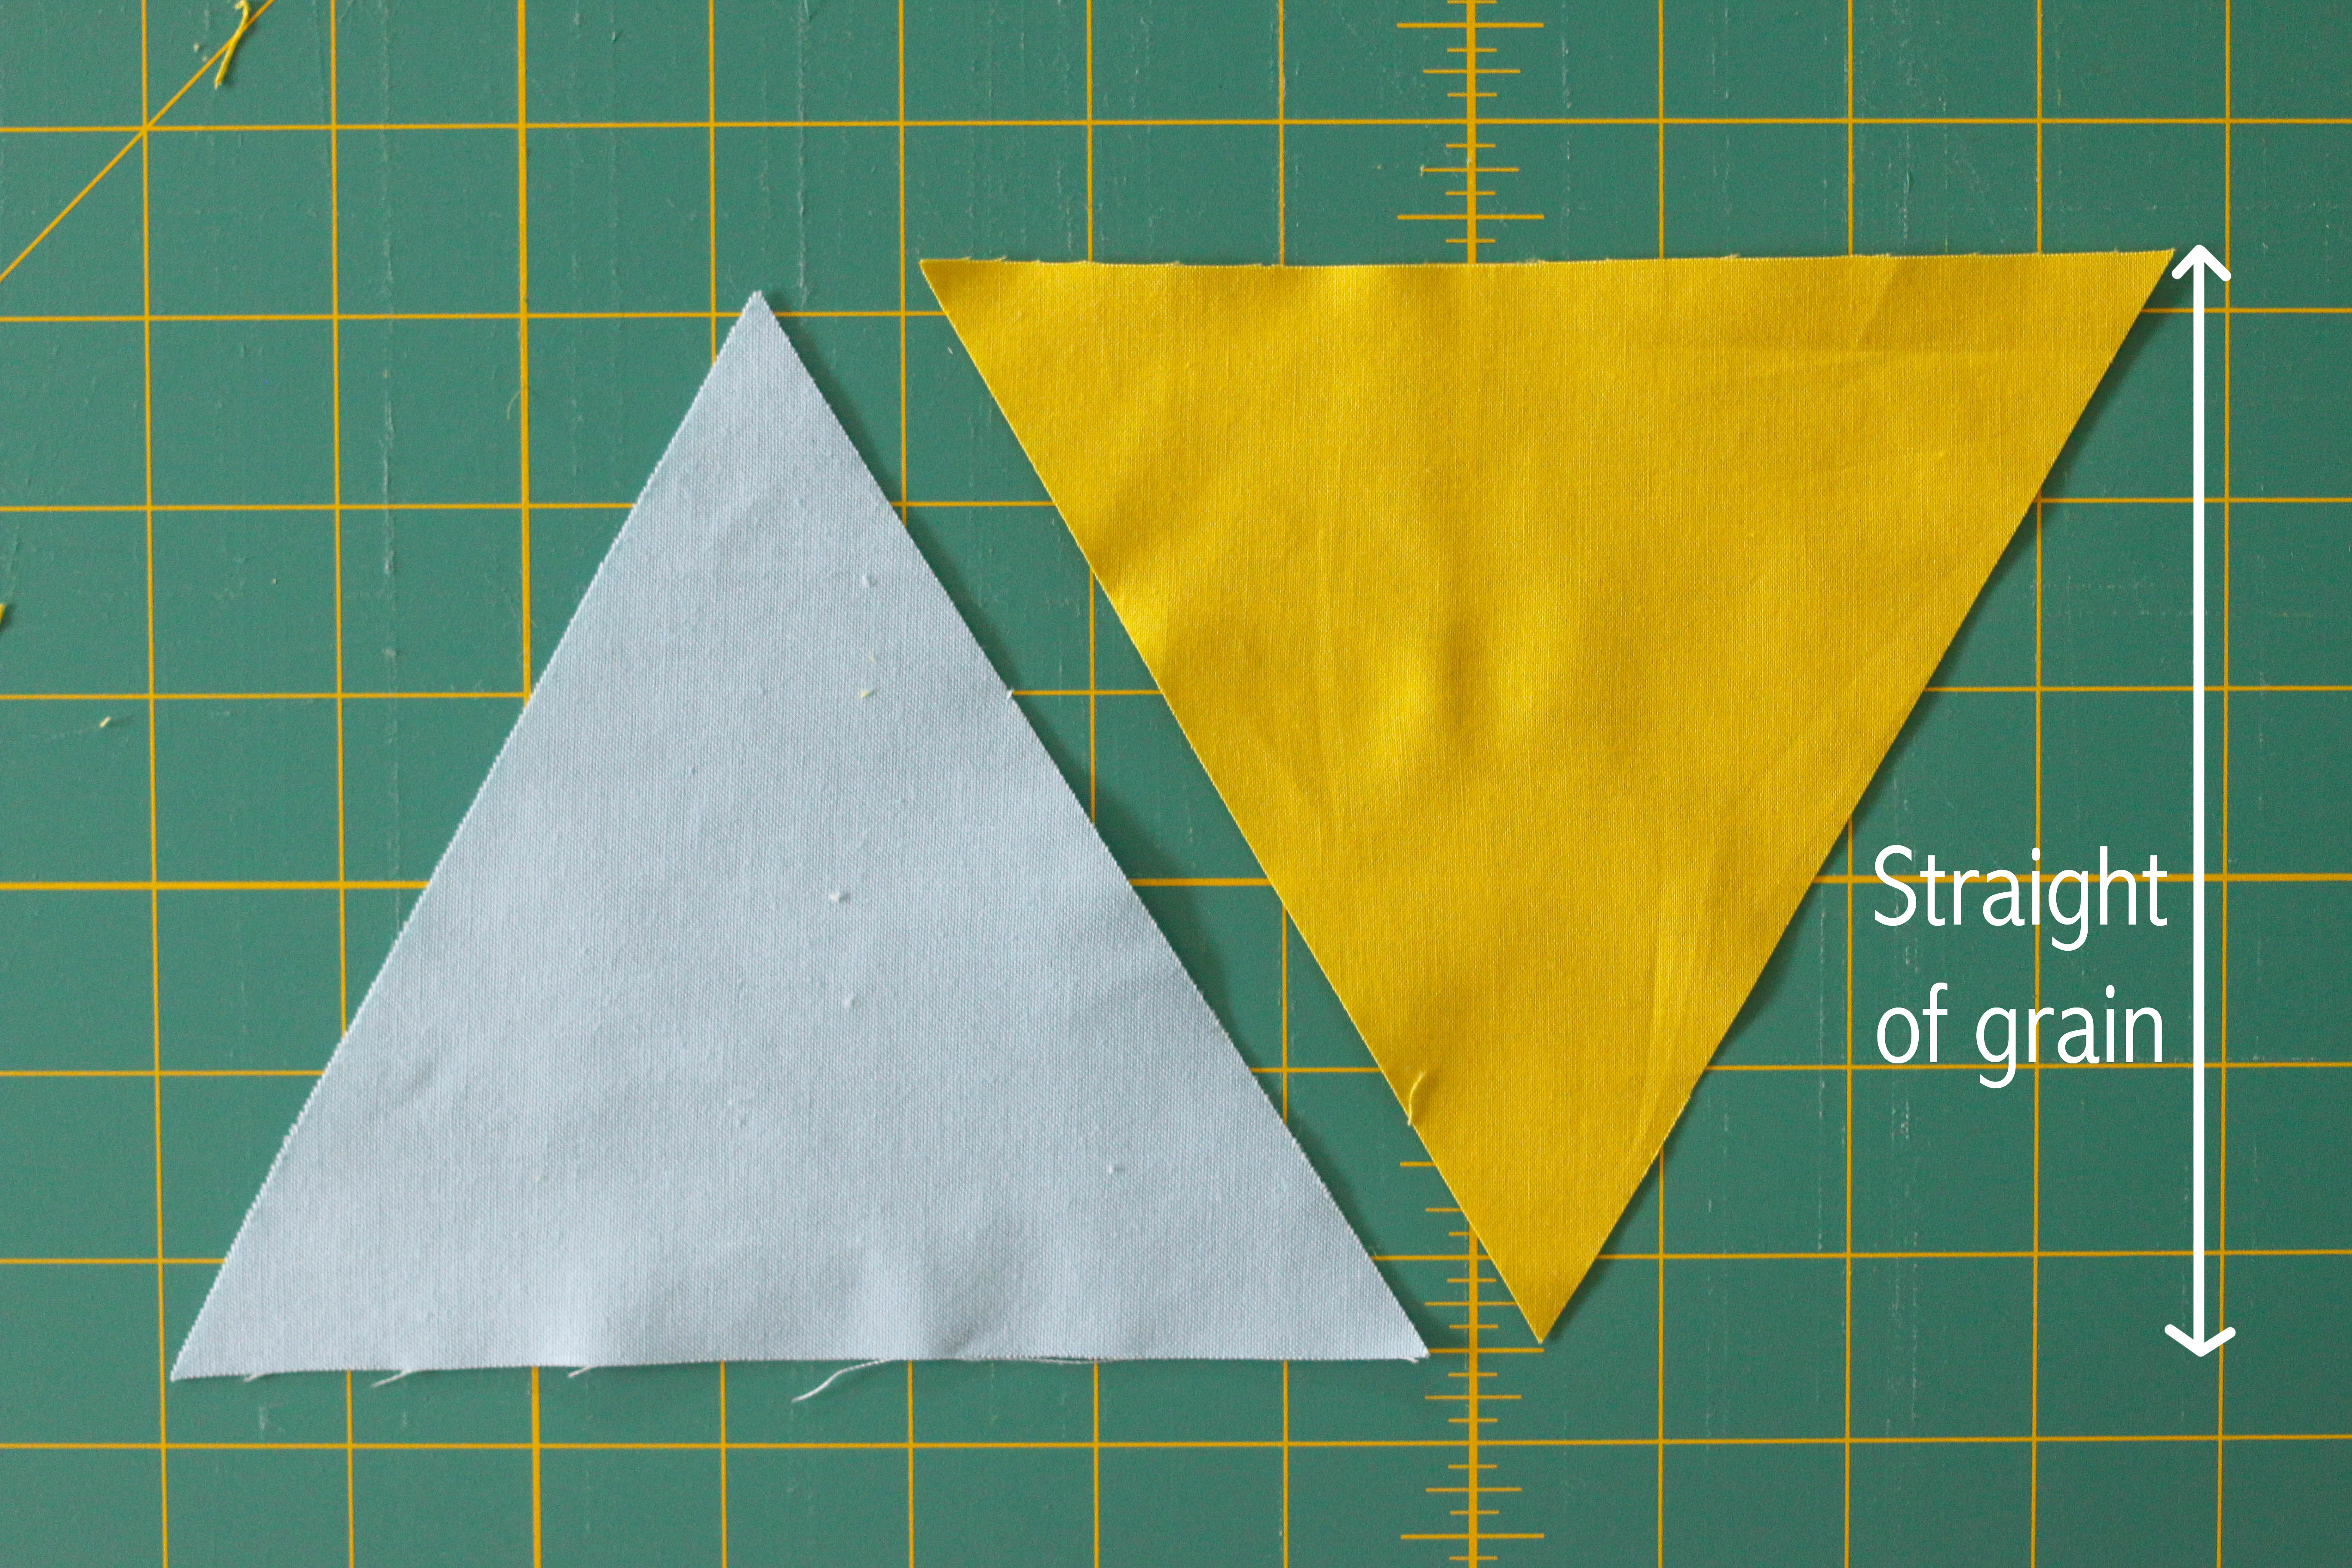 What Is The Best Way To Piece Together The Triangle Quilt Blocks?